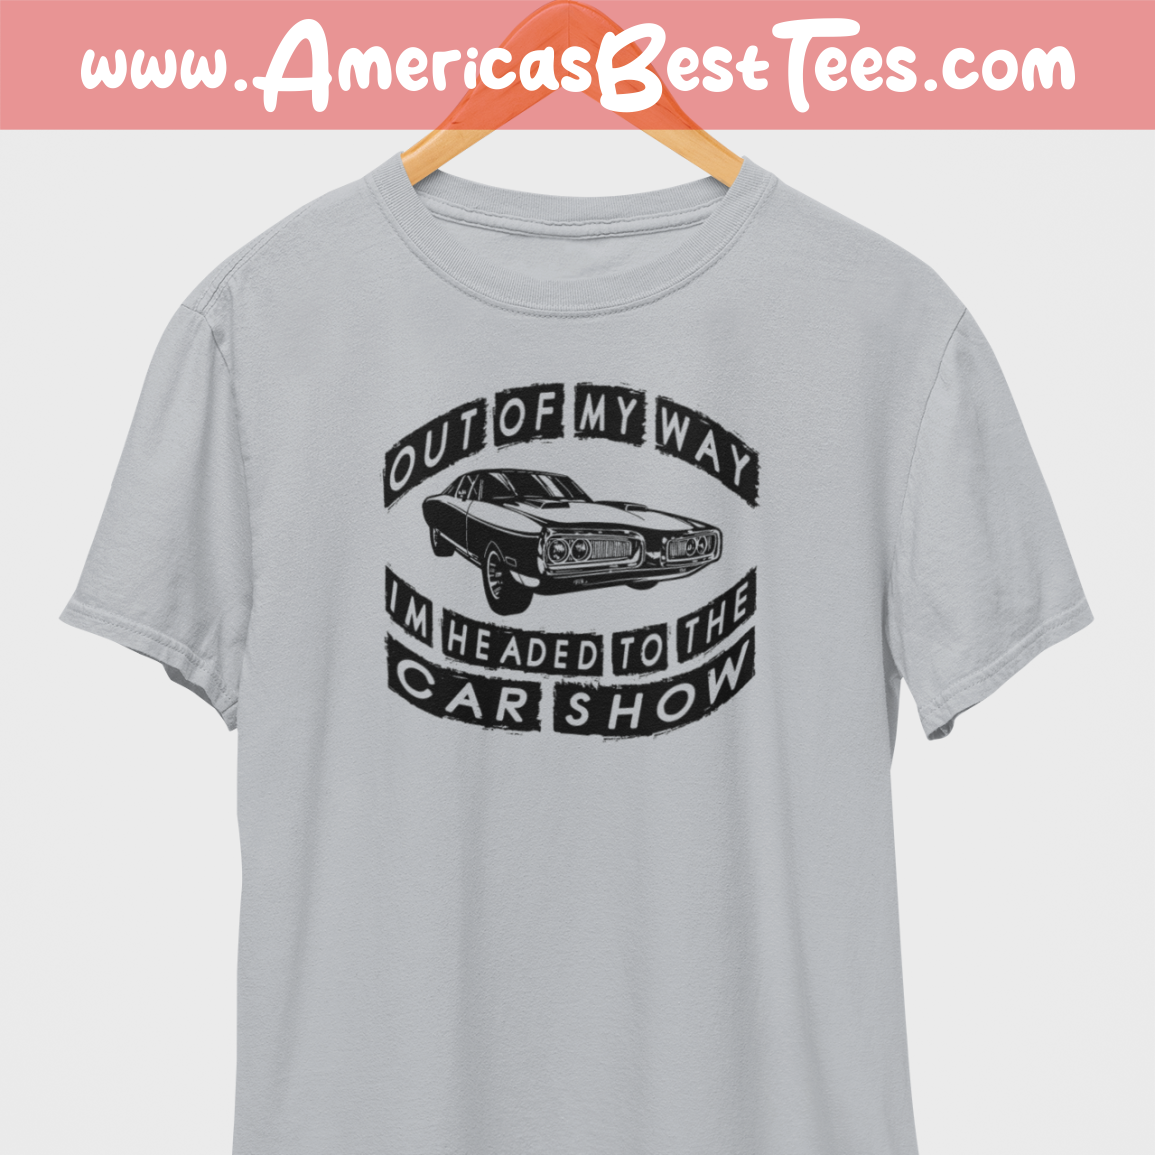 Out Of My Way Car Show Black Print T-Shirt